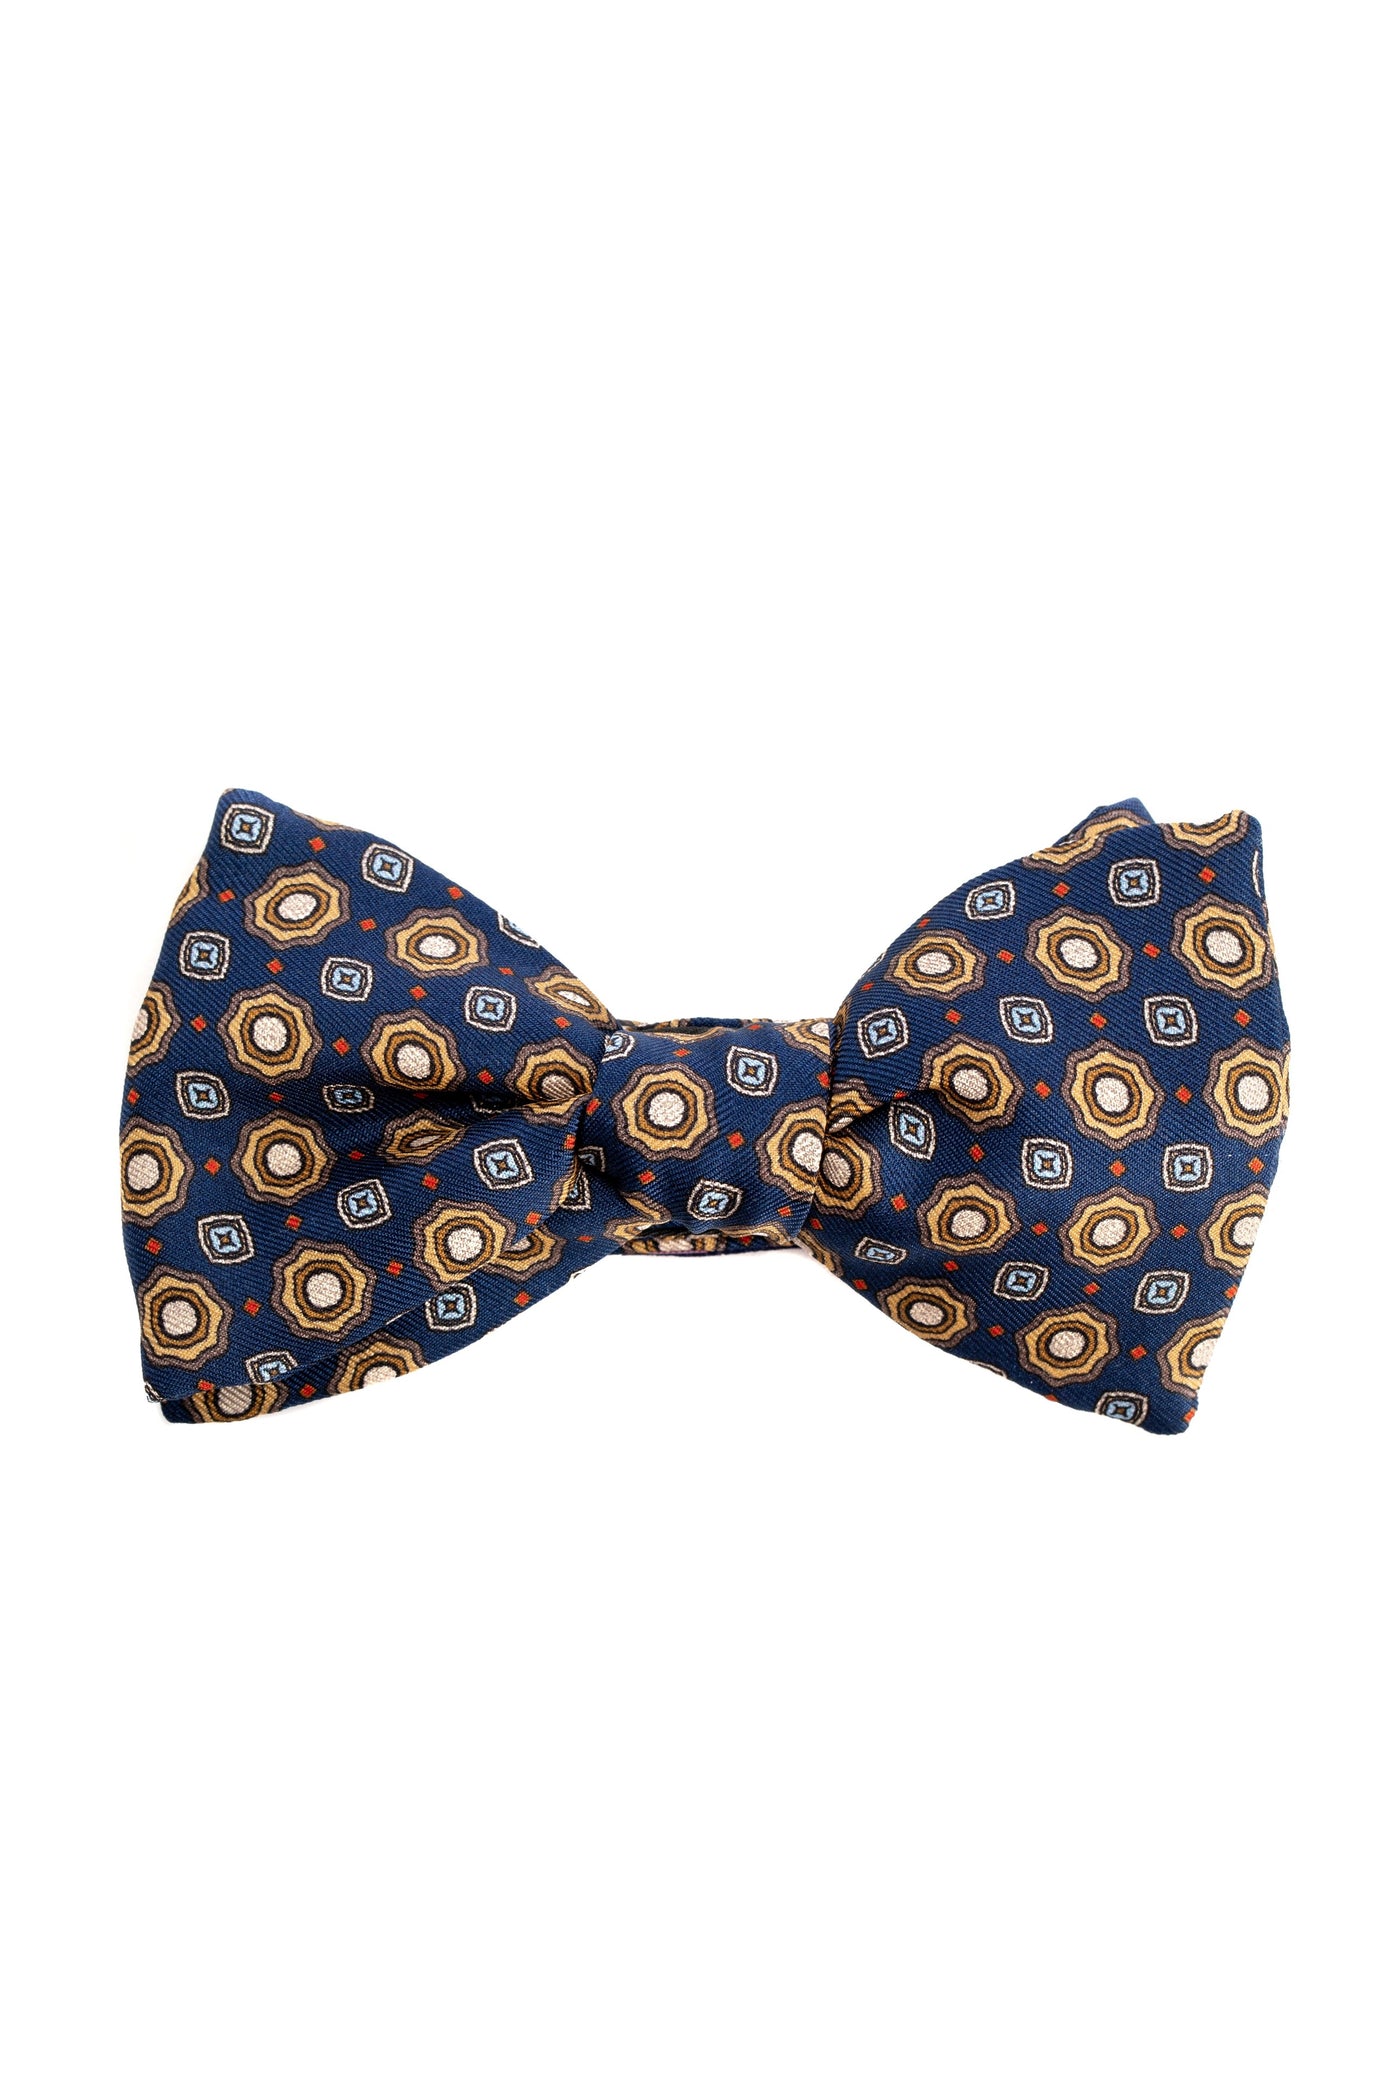 Navy blue bow tie with pattern